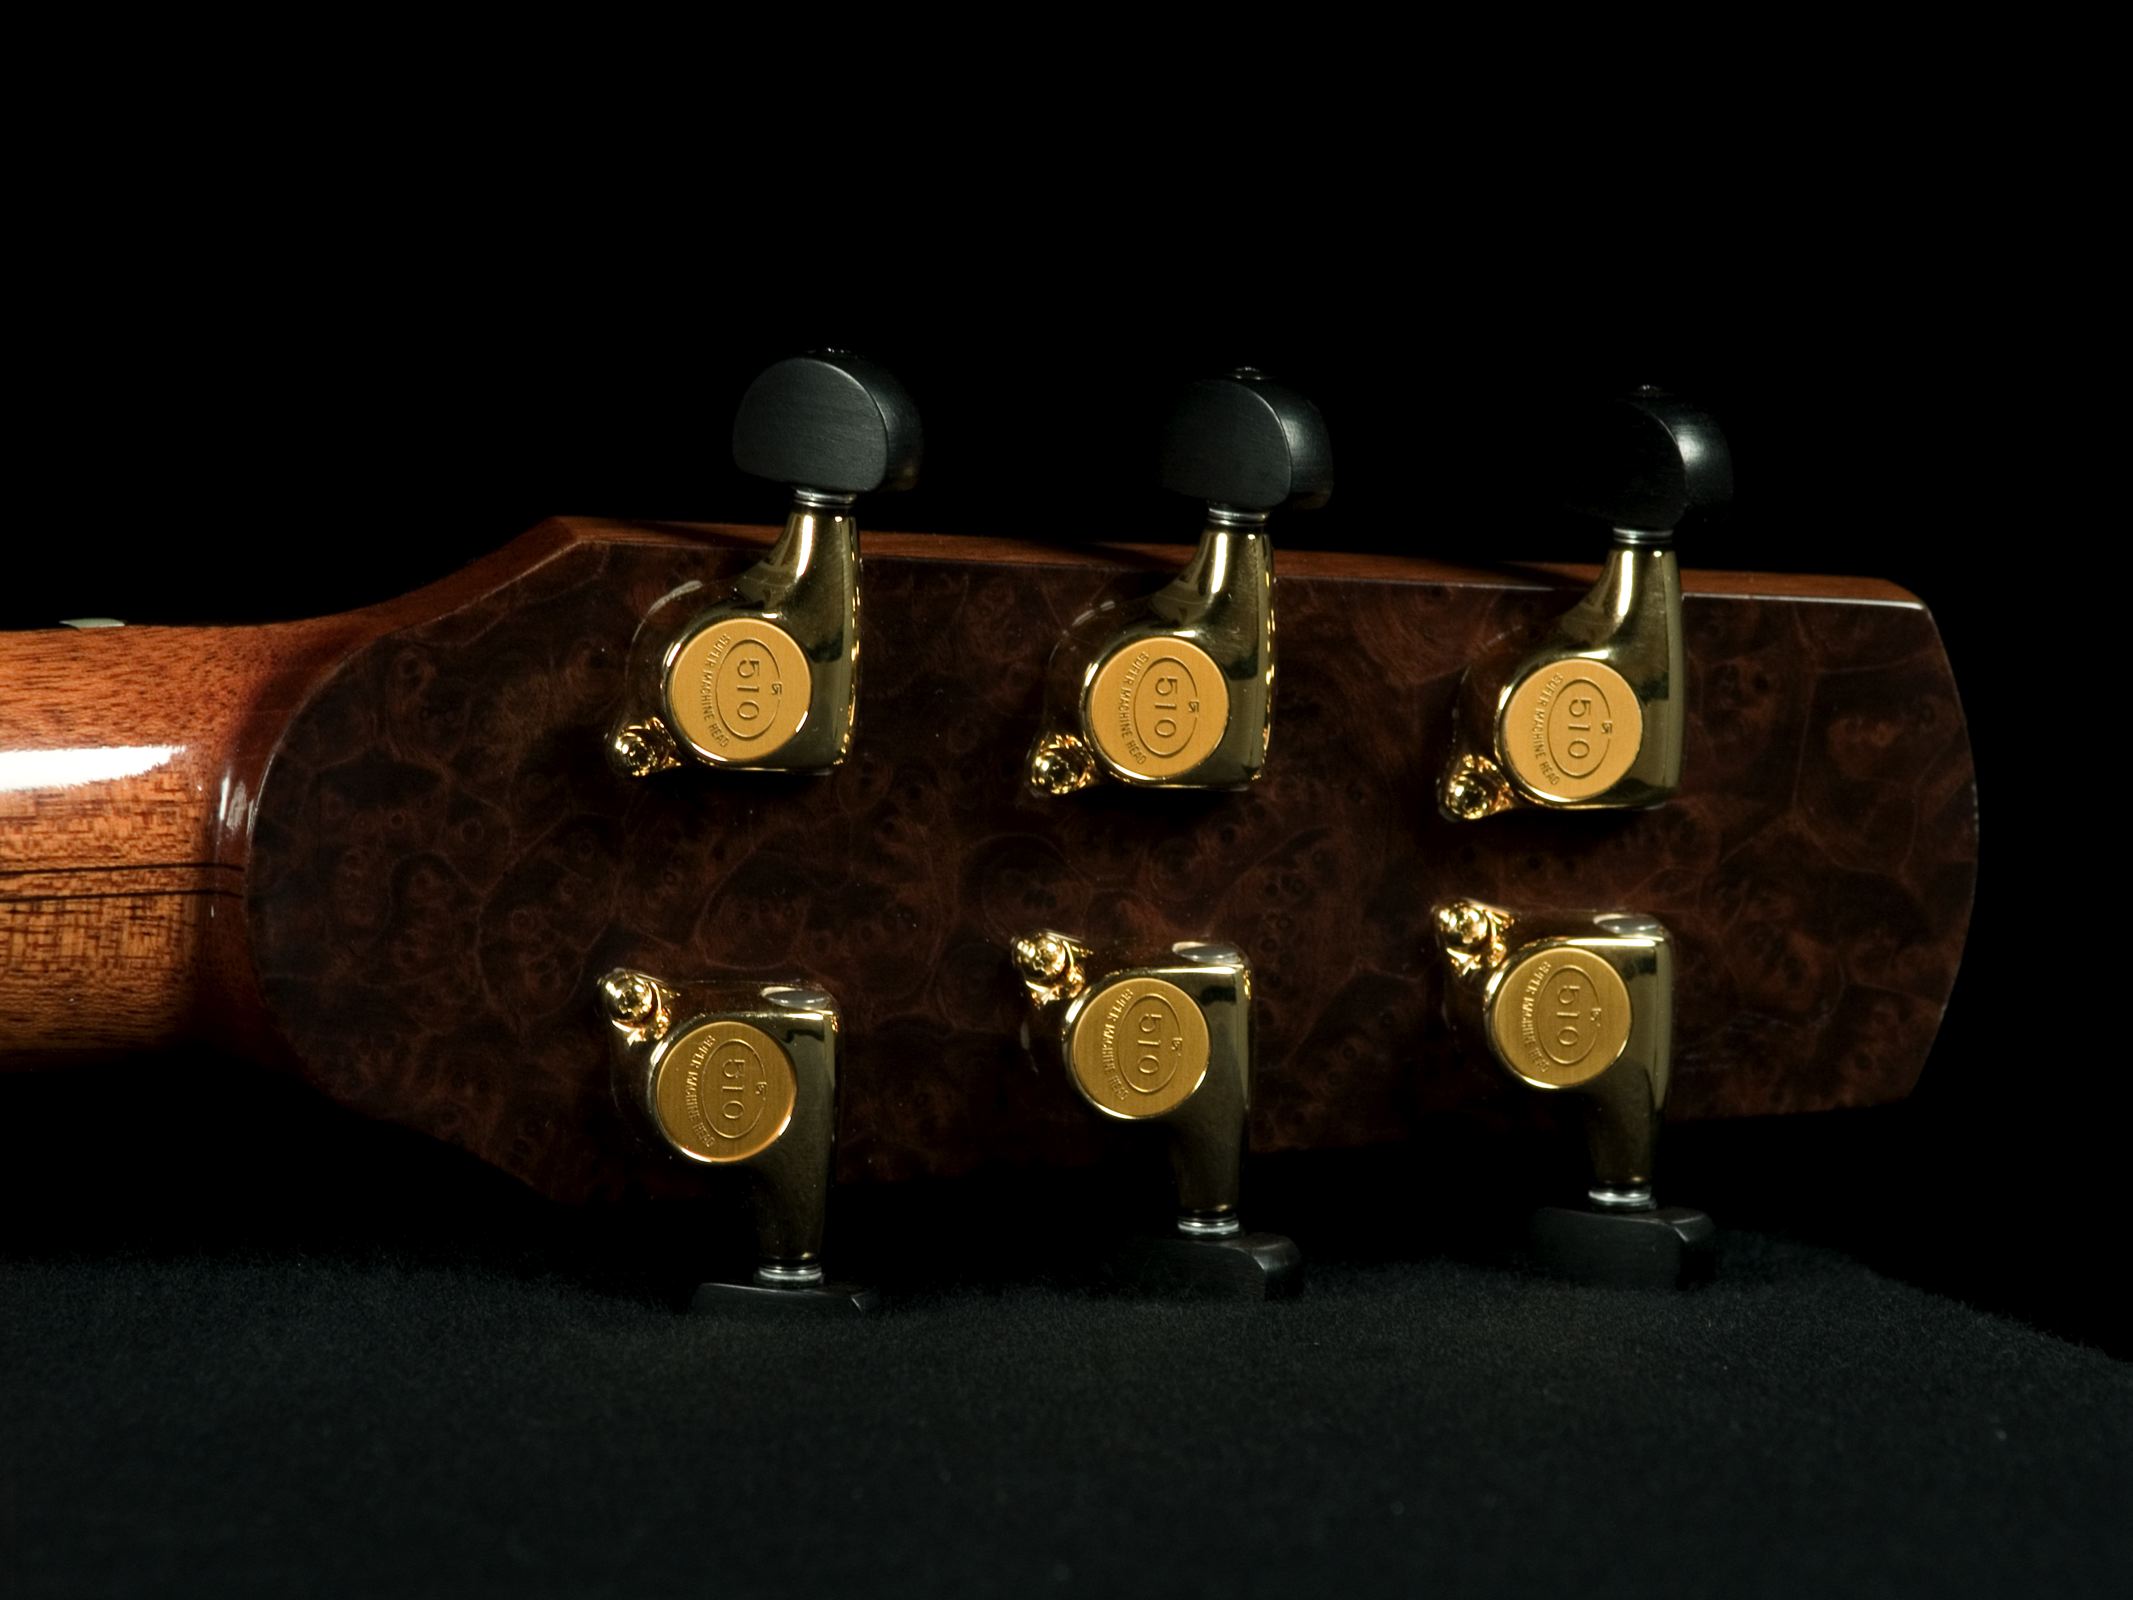 four small ss cufflinks on top of an aged guitar